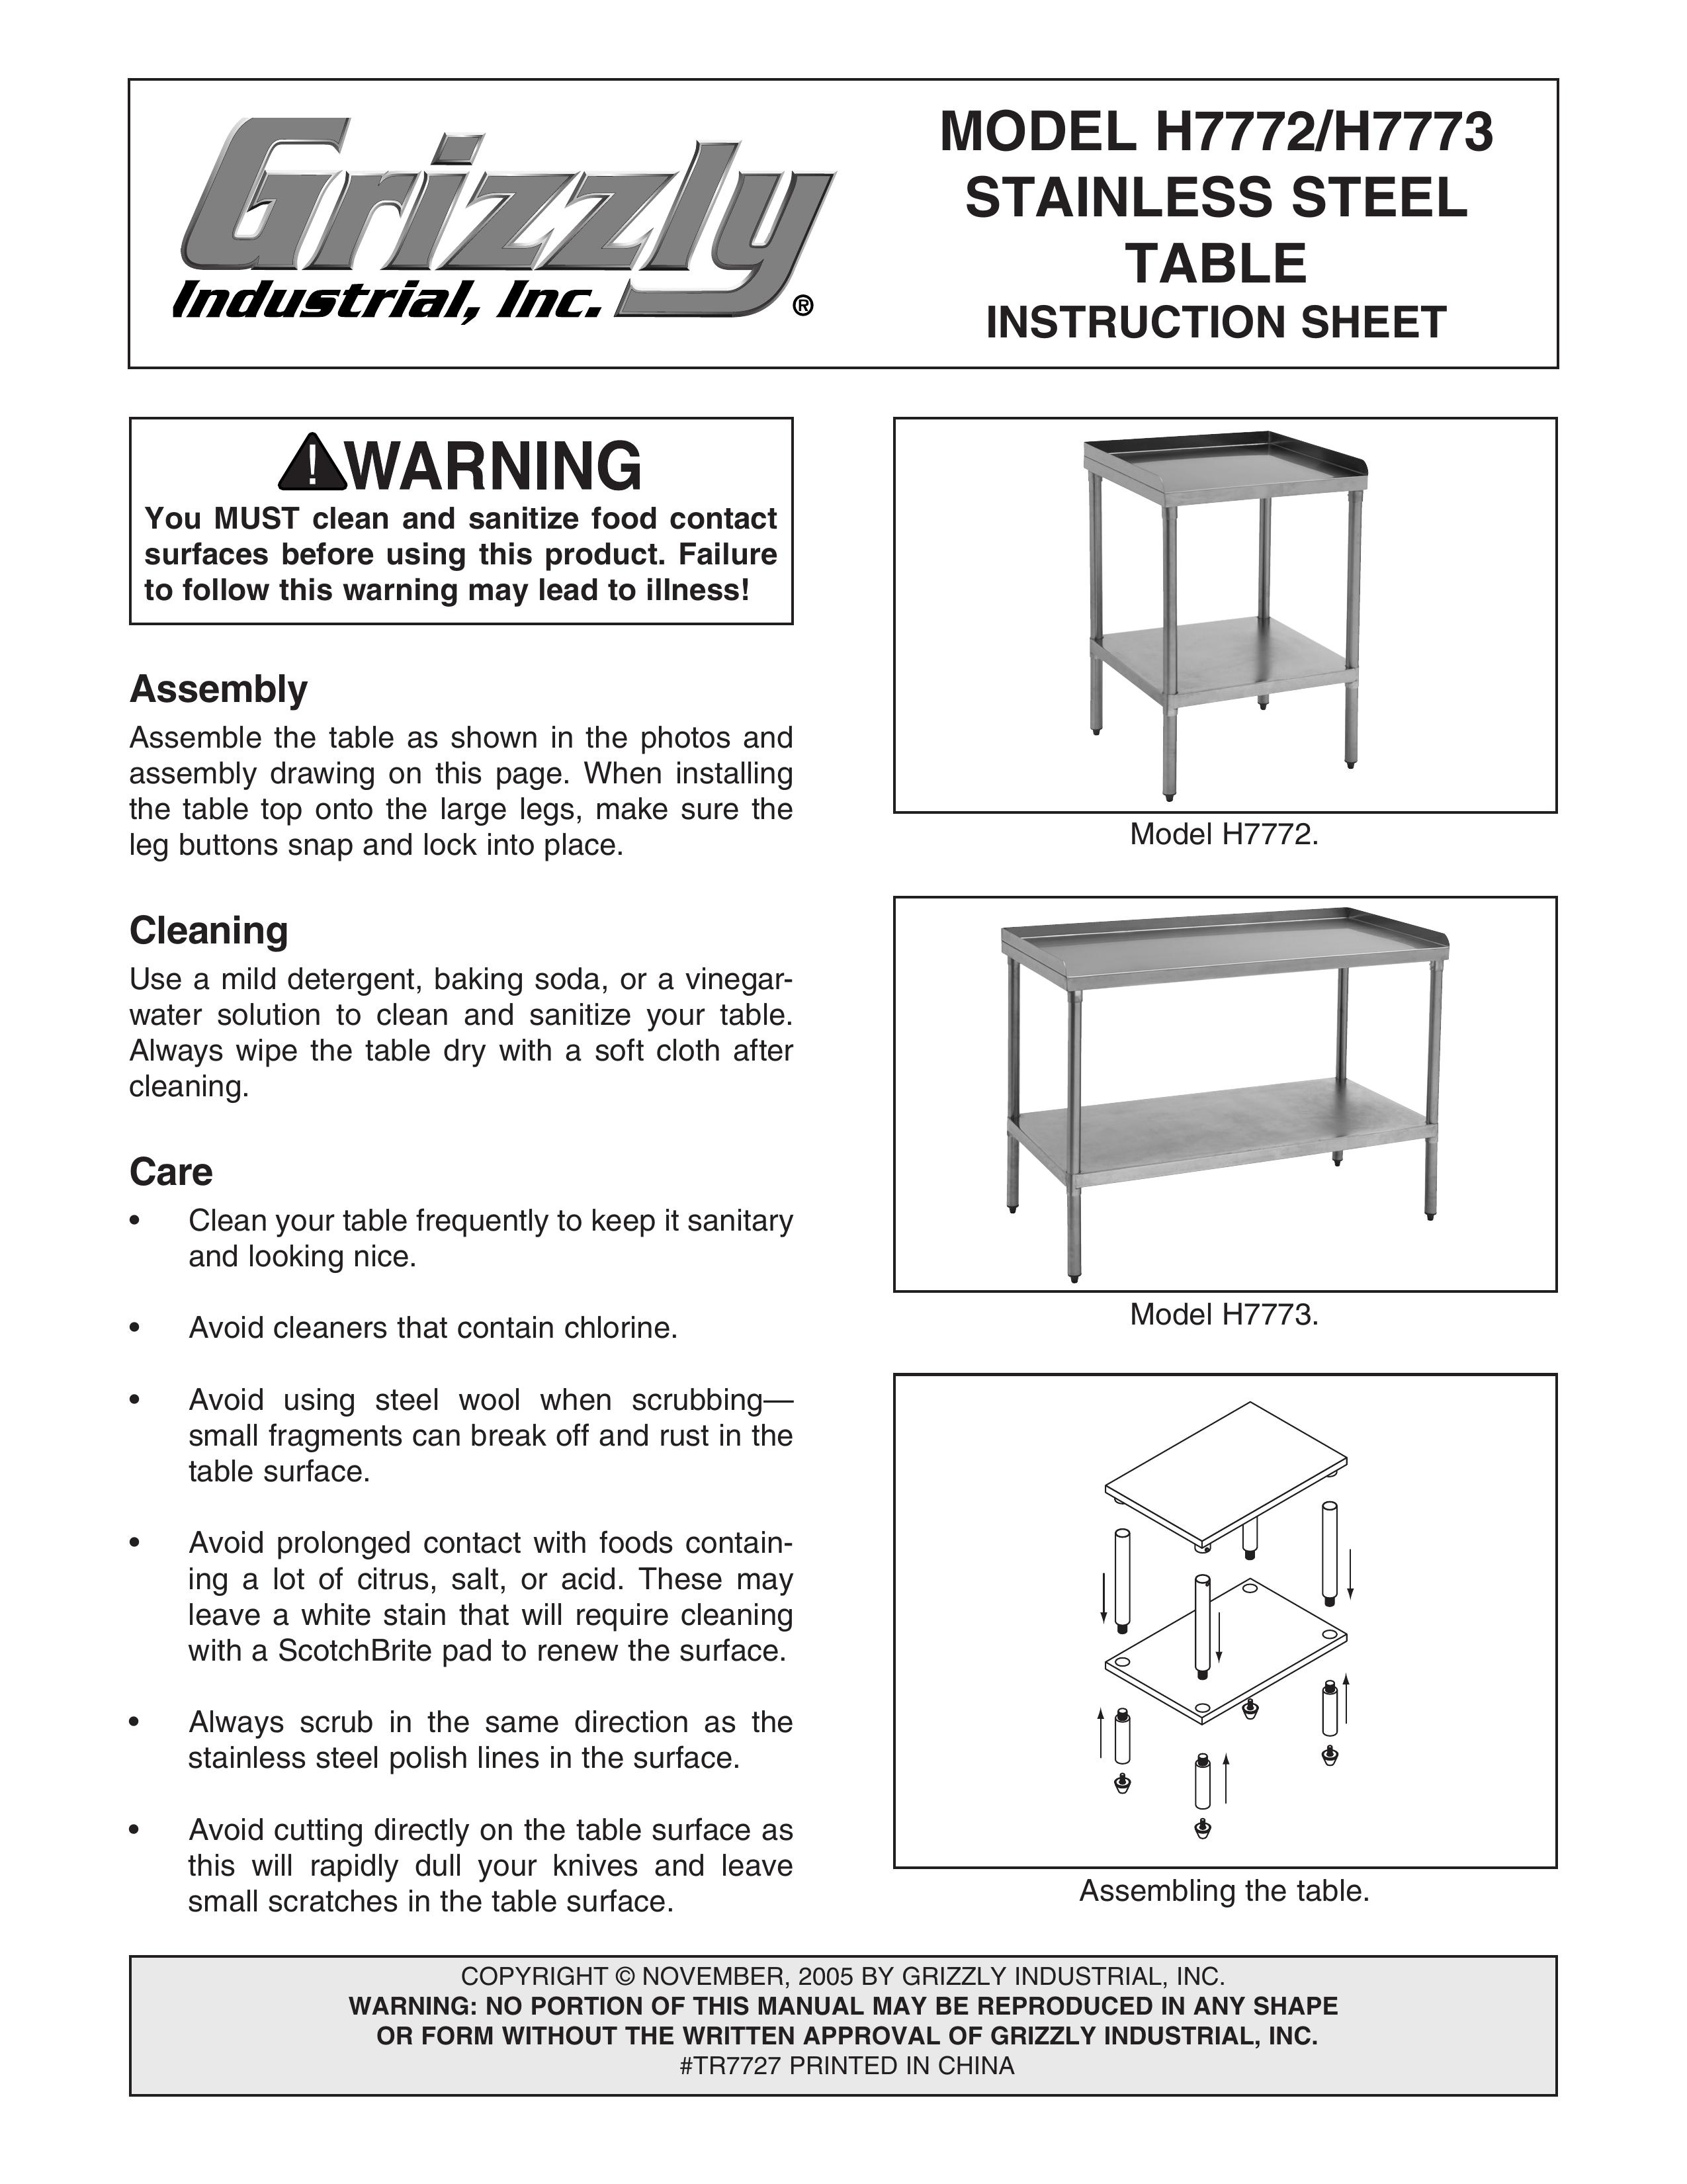 Grizzly H7772 Patio Furniture User Manual